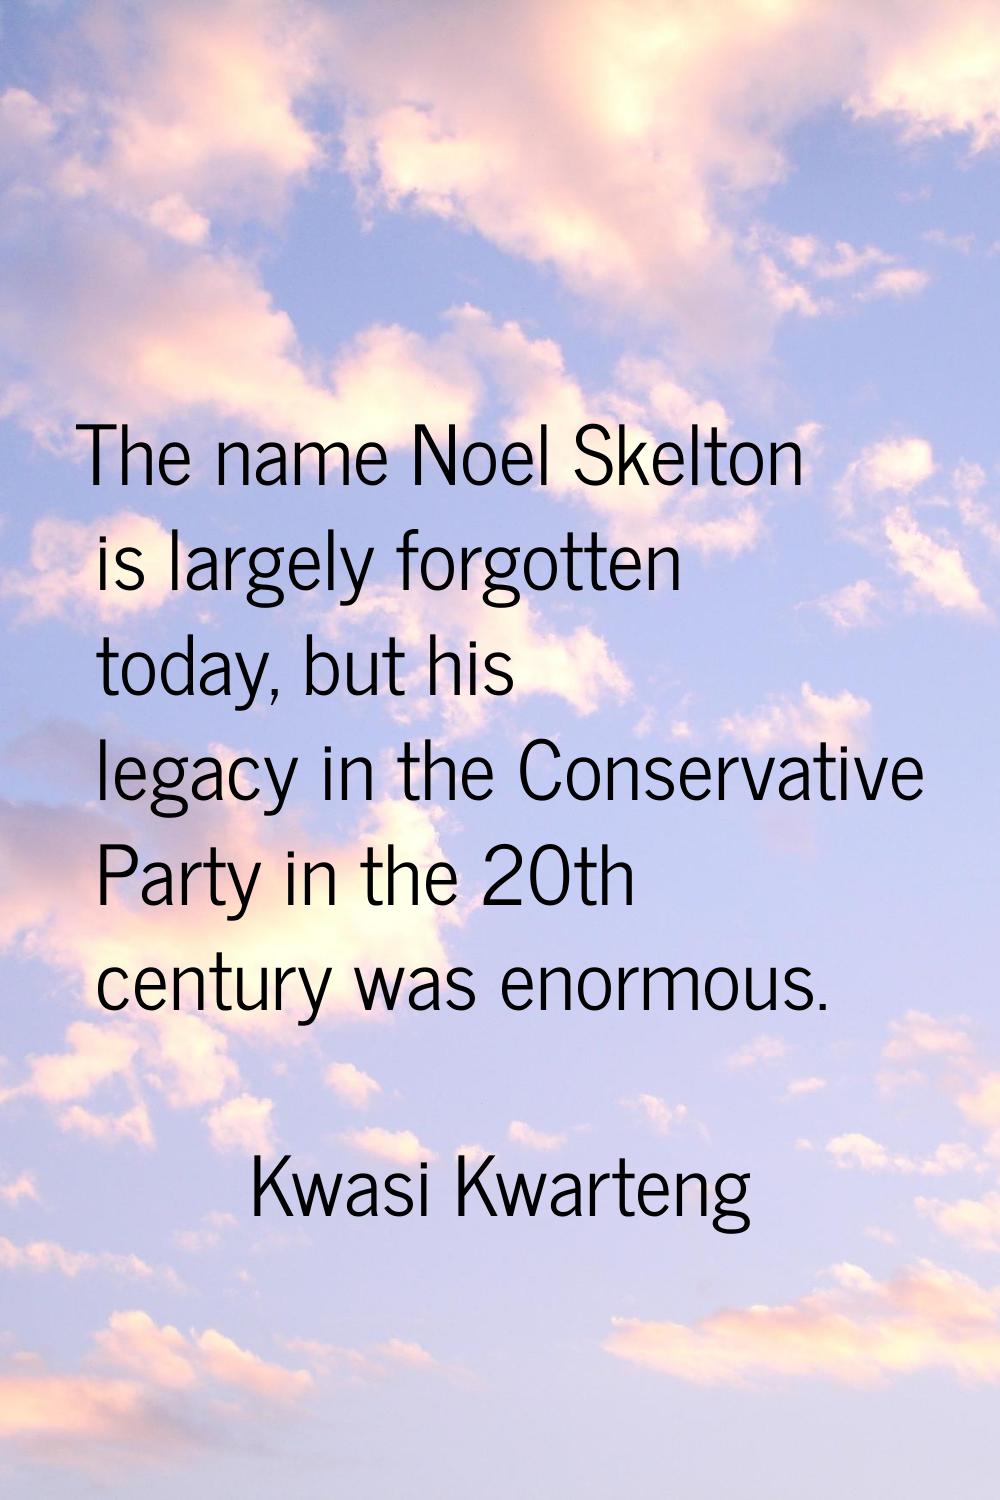 The name Noel Skelton is largely forgotten today, but his legacy in the Conservative Party in the 2